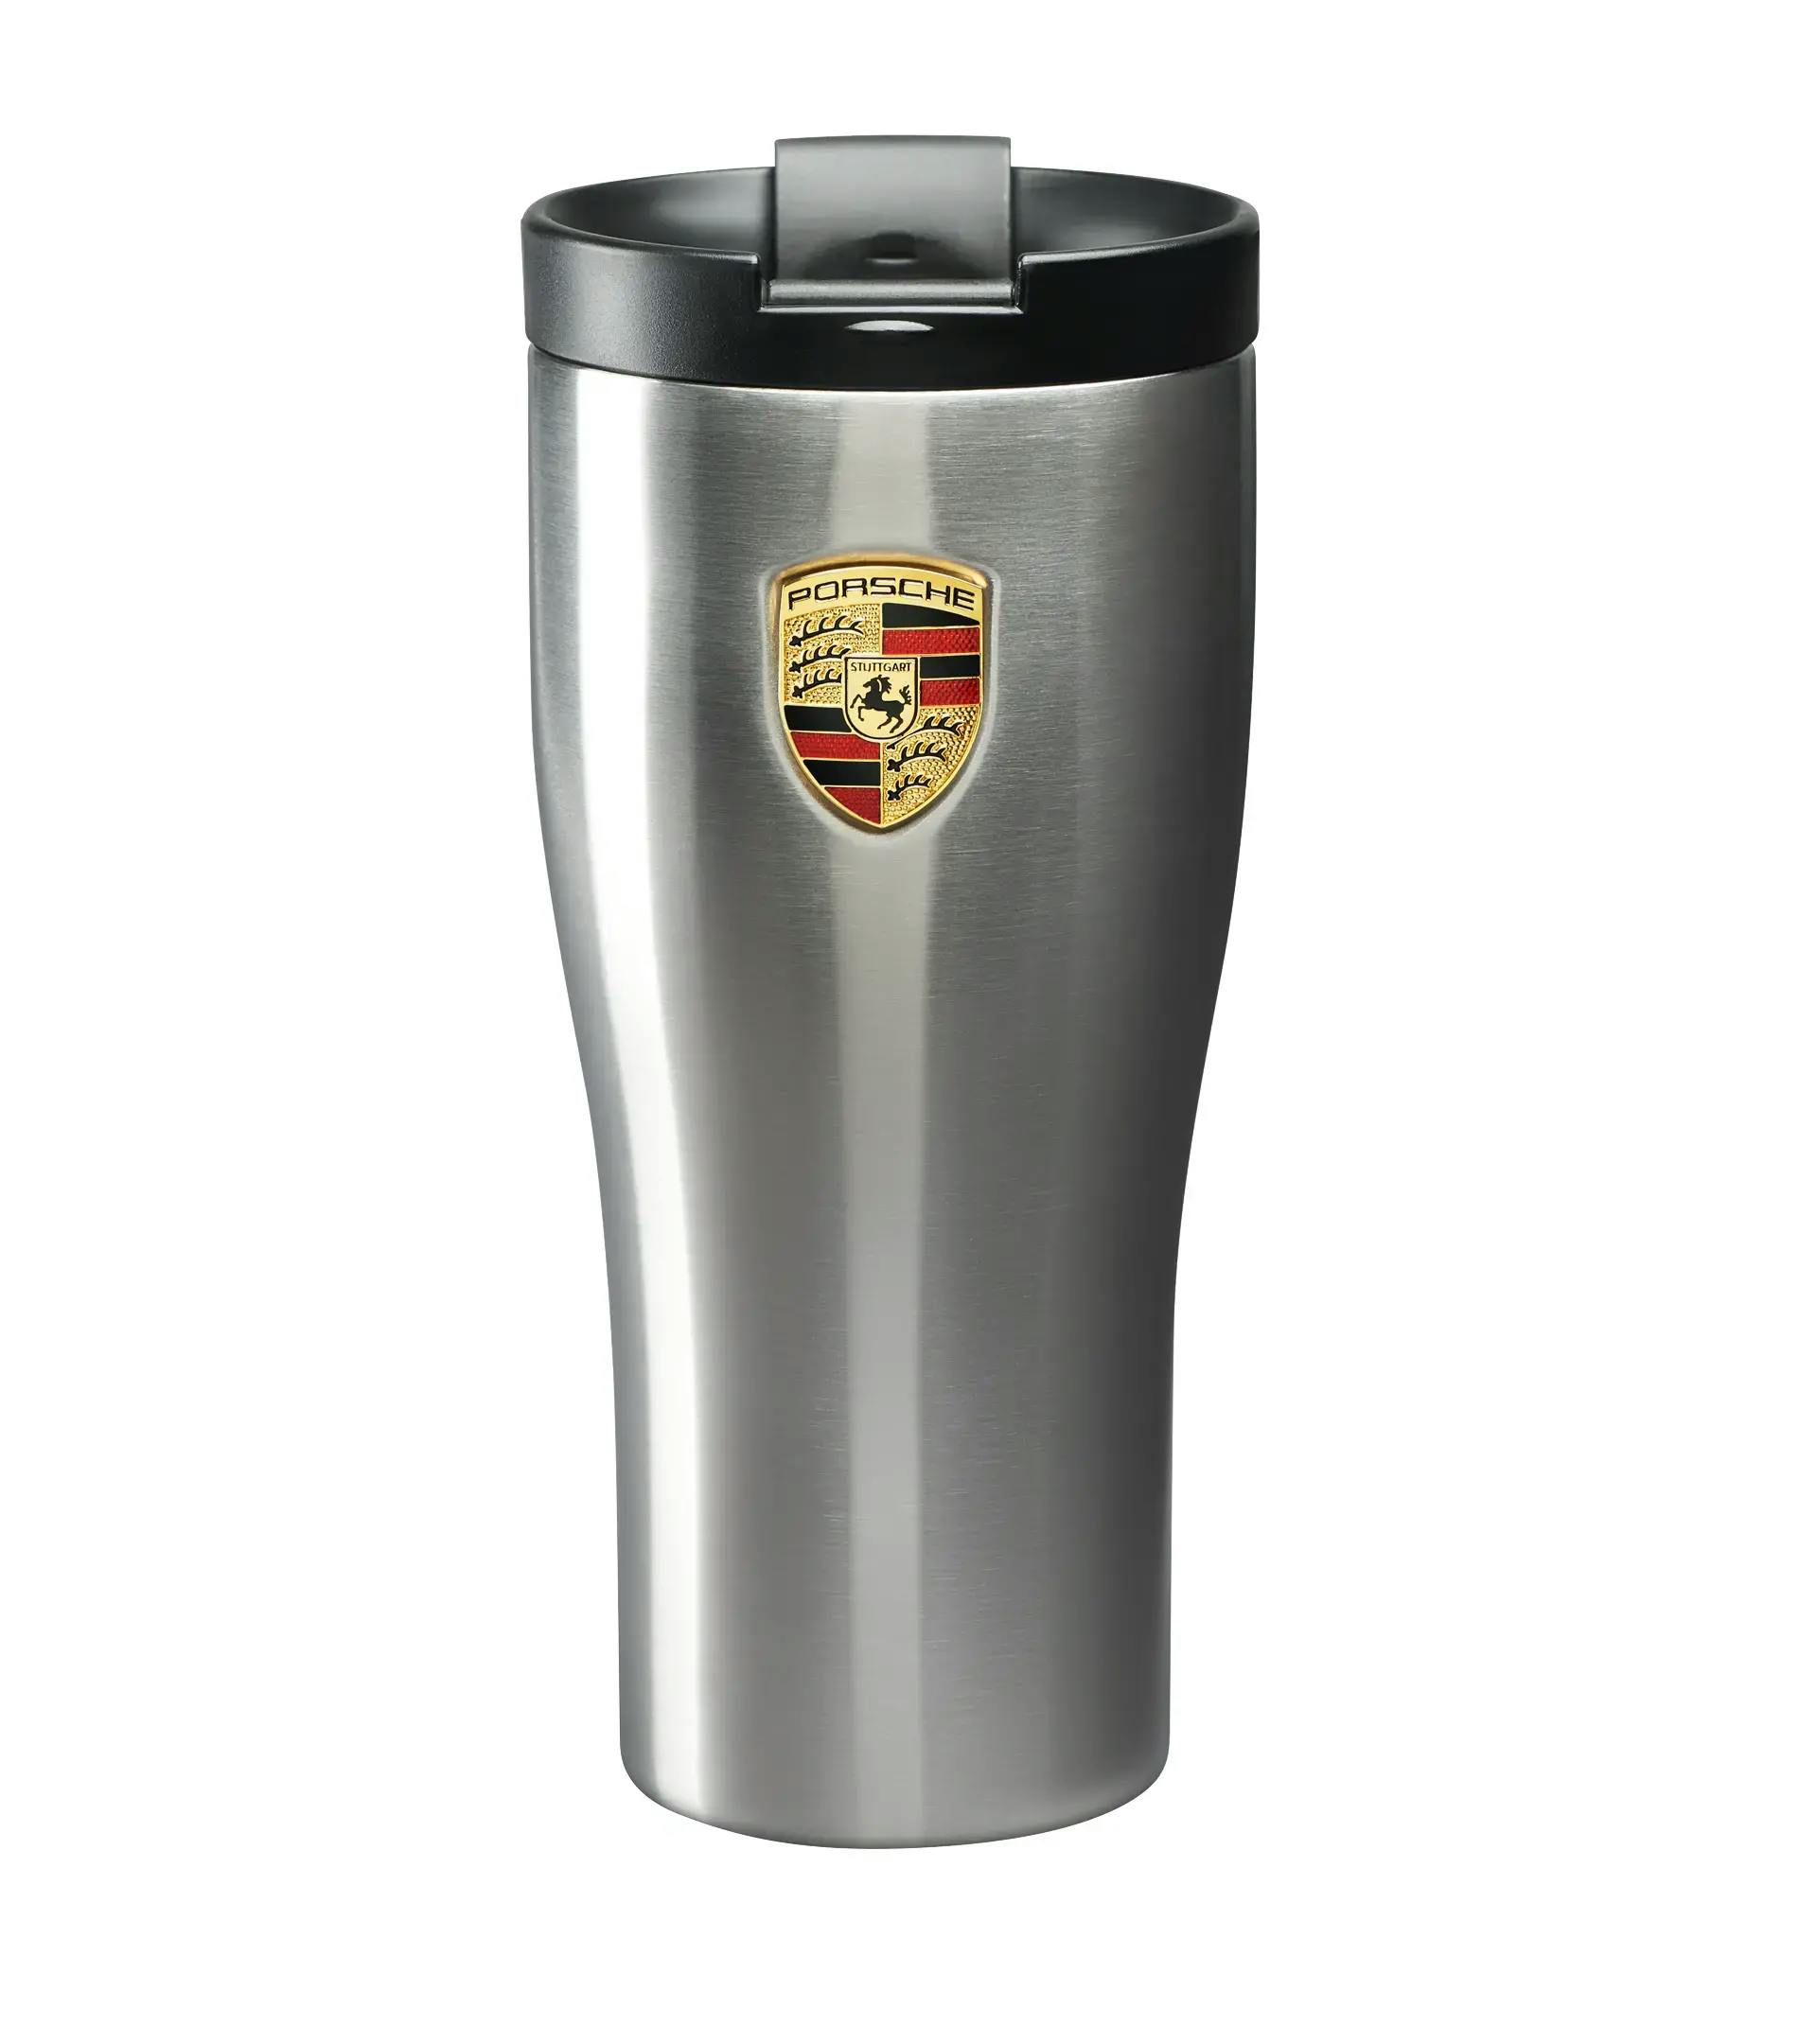 thermos insulated coffee mug from